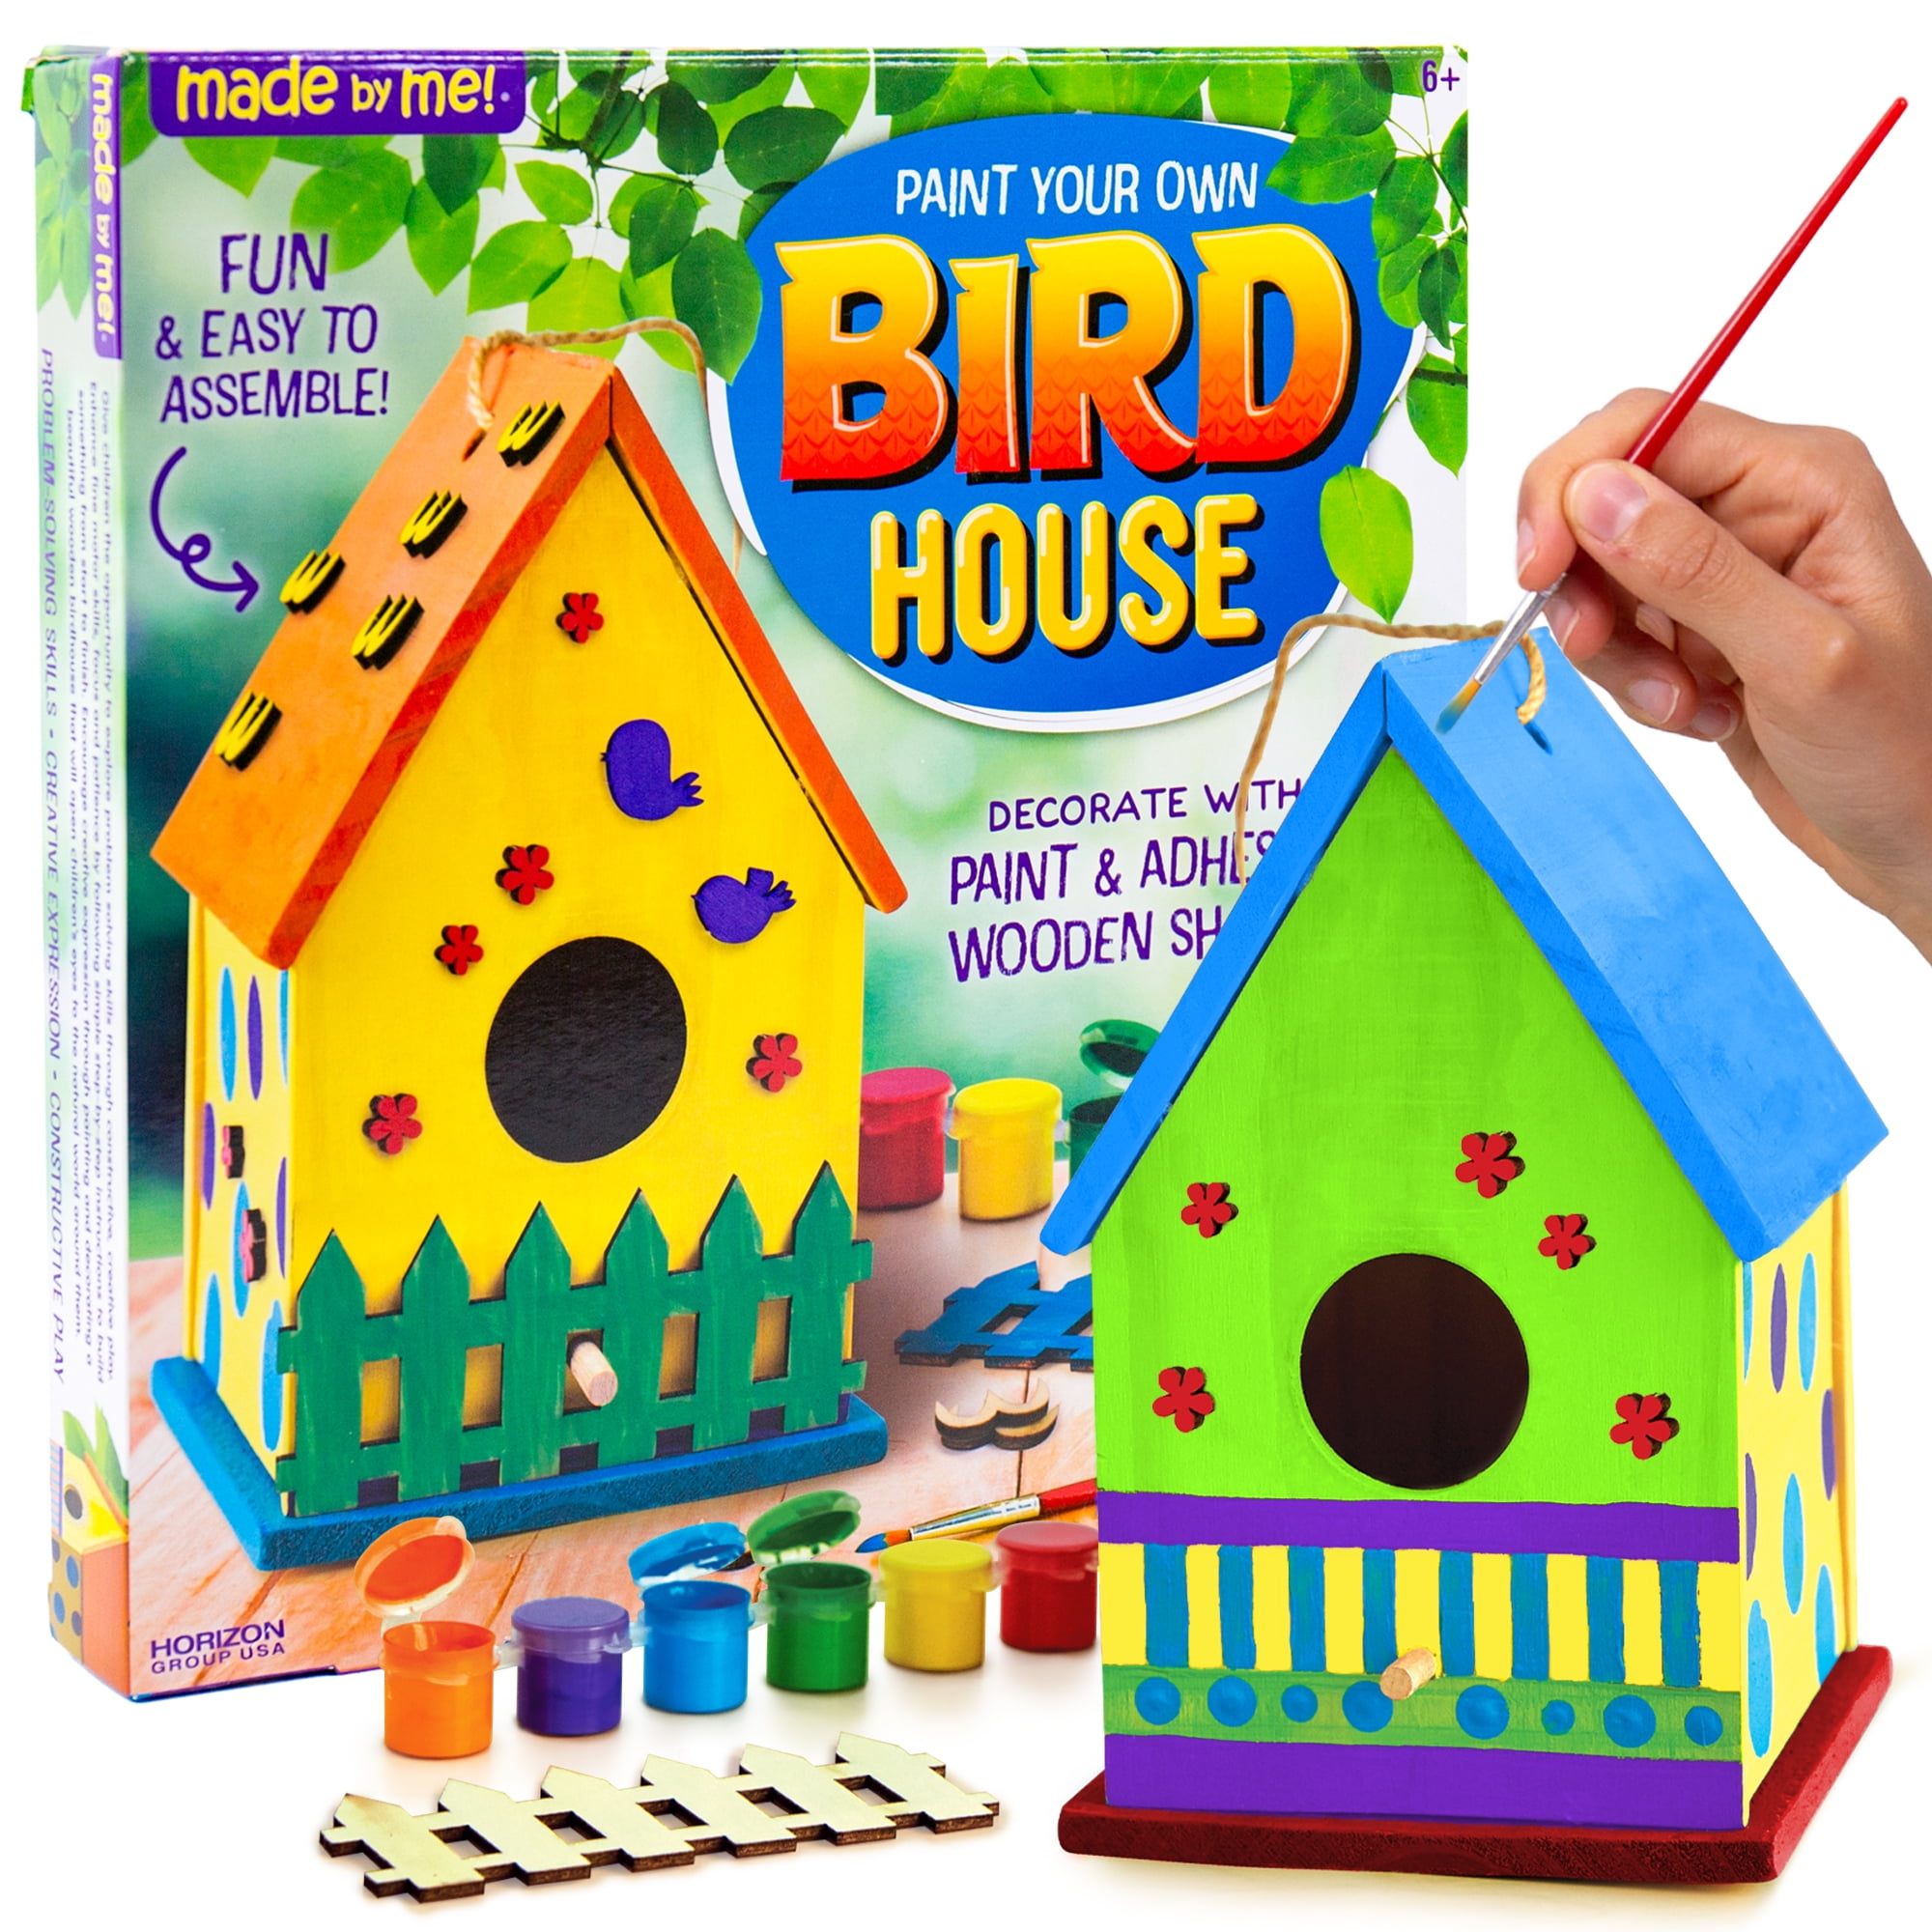 8-12 4 Wooden Craft Kits for Kids Girls Boys Toddler Ages 4-6 DIY Bird House Kit Arts and Crafts for Kids to Build 6-8 DIY Unfinished Bulk Birdhouse Sets Wooden Birdhouse Painting 